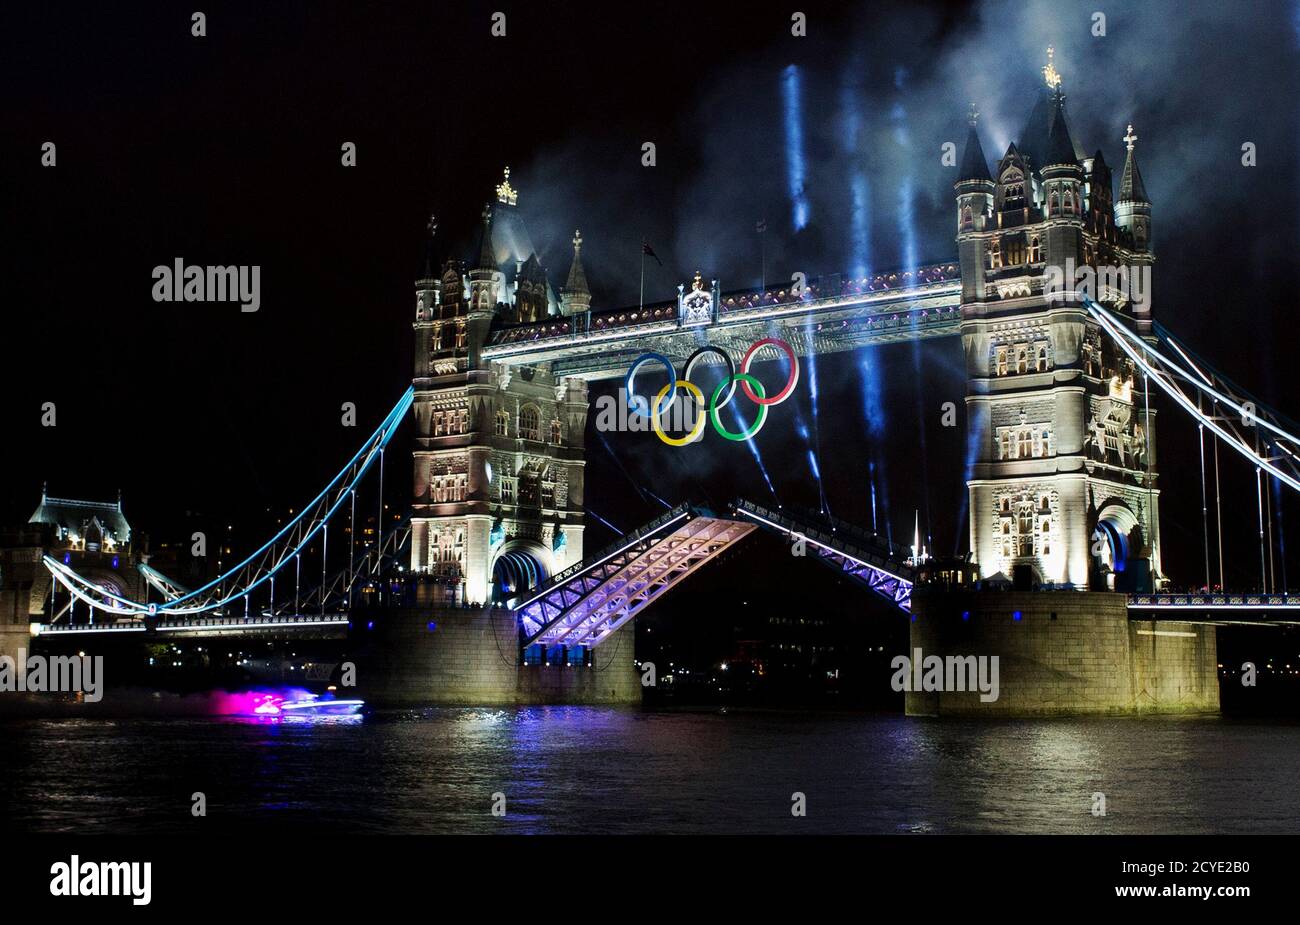 A speedboat carrying footballer David Beckham holding the Olympic torch, races under the Tower Bridge during the opening ceremony of London 2012 Olympic Games July 27, 2012. REUTERS/Mark Blinch (BRITAIN - Tags: SPORT OLYMPICS) FOR BEST QUALITY IMAGE SEE:GM2E88E1KDC01 Stock Photo